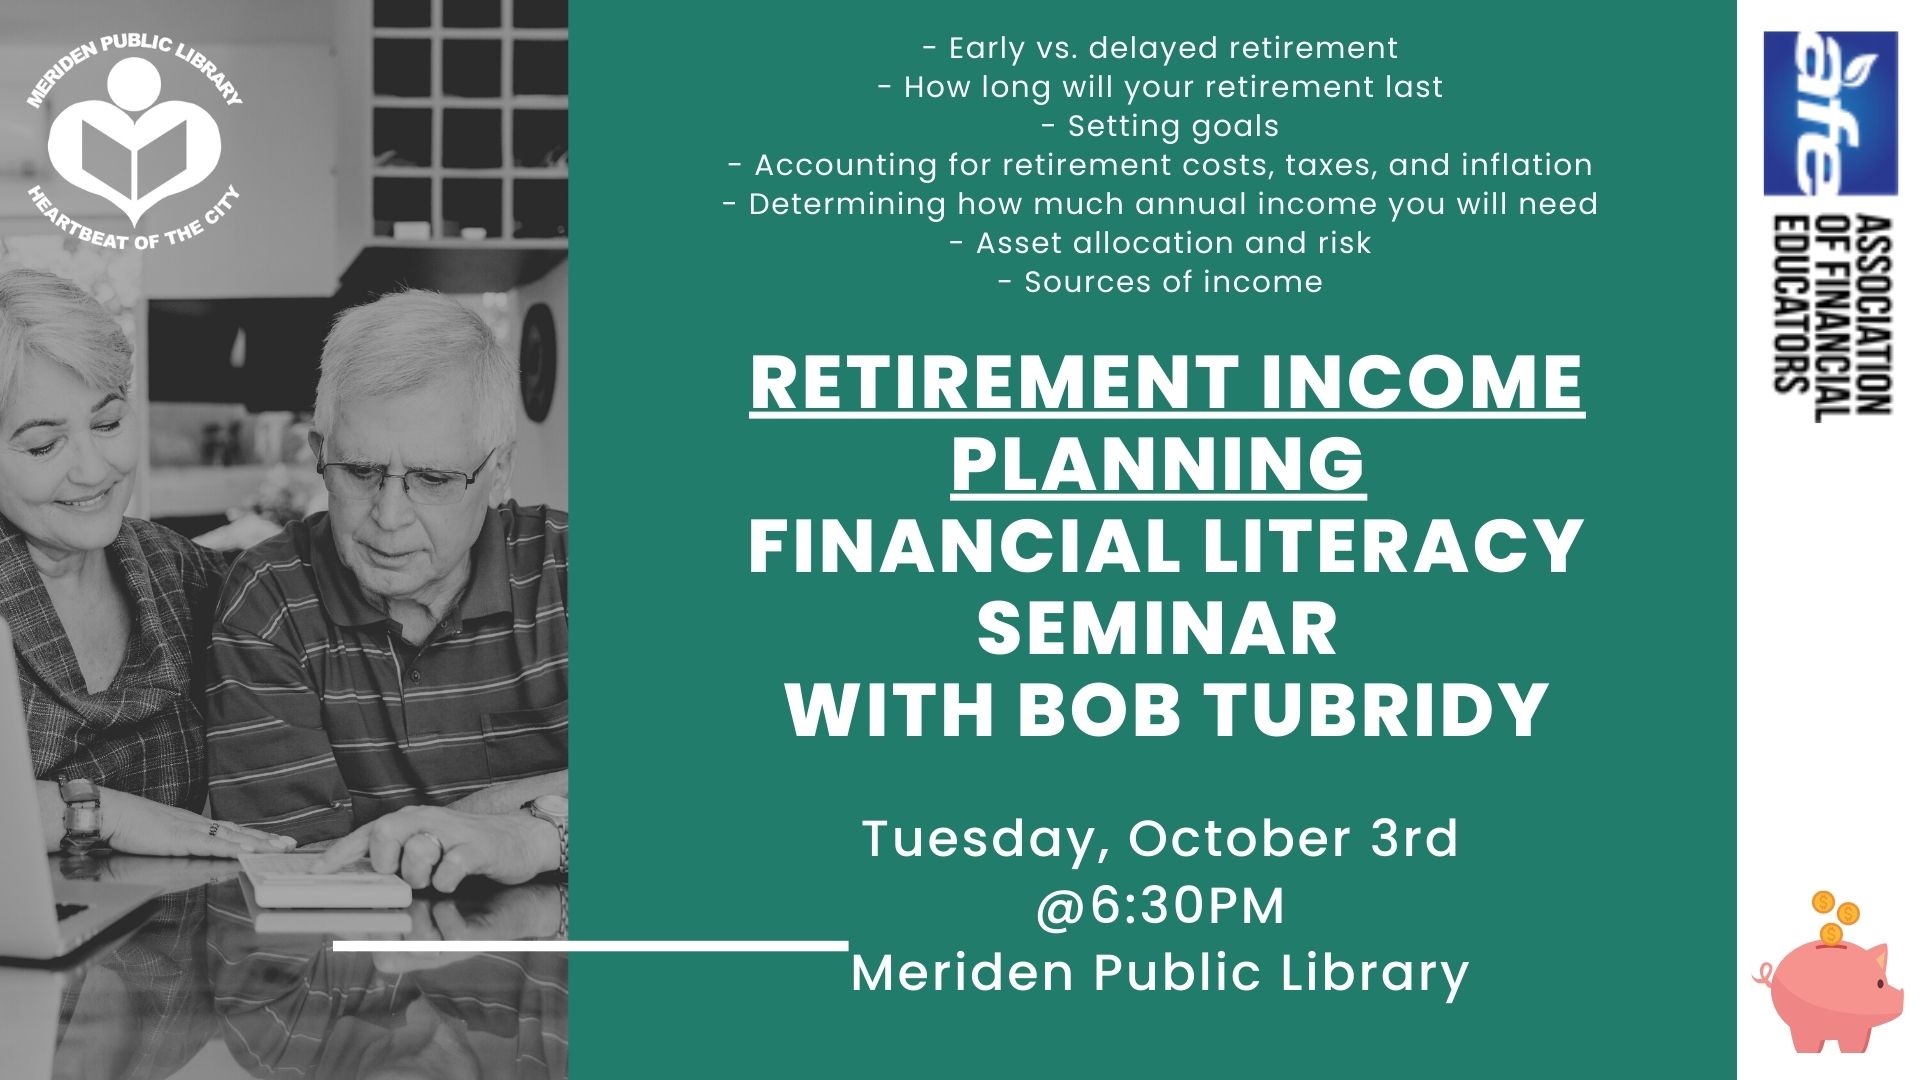 Retirement Income Planning - Financial Literacy Seminar with Bob Tubridy